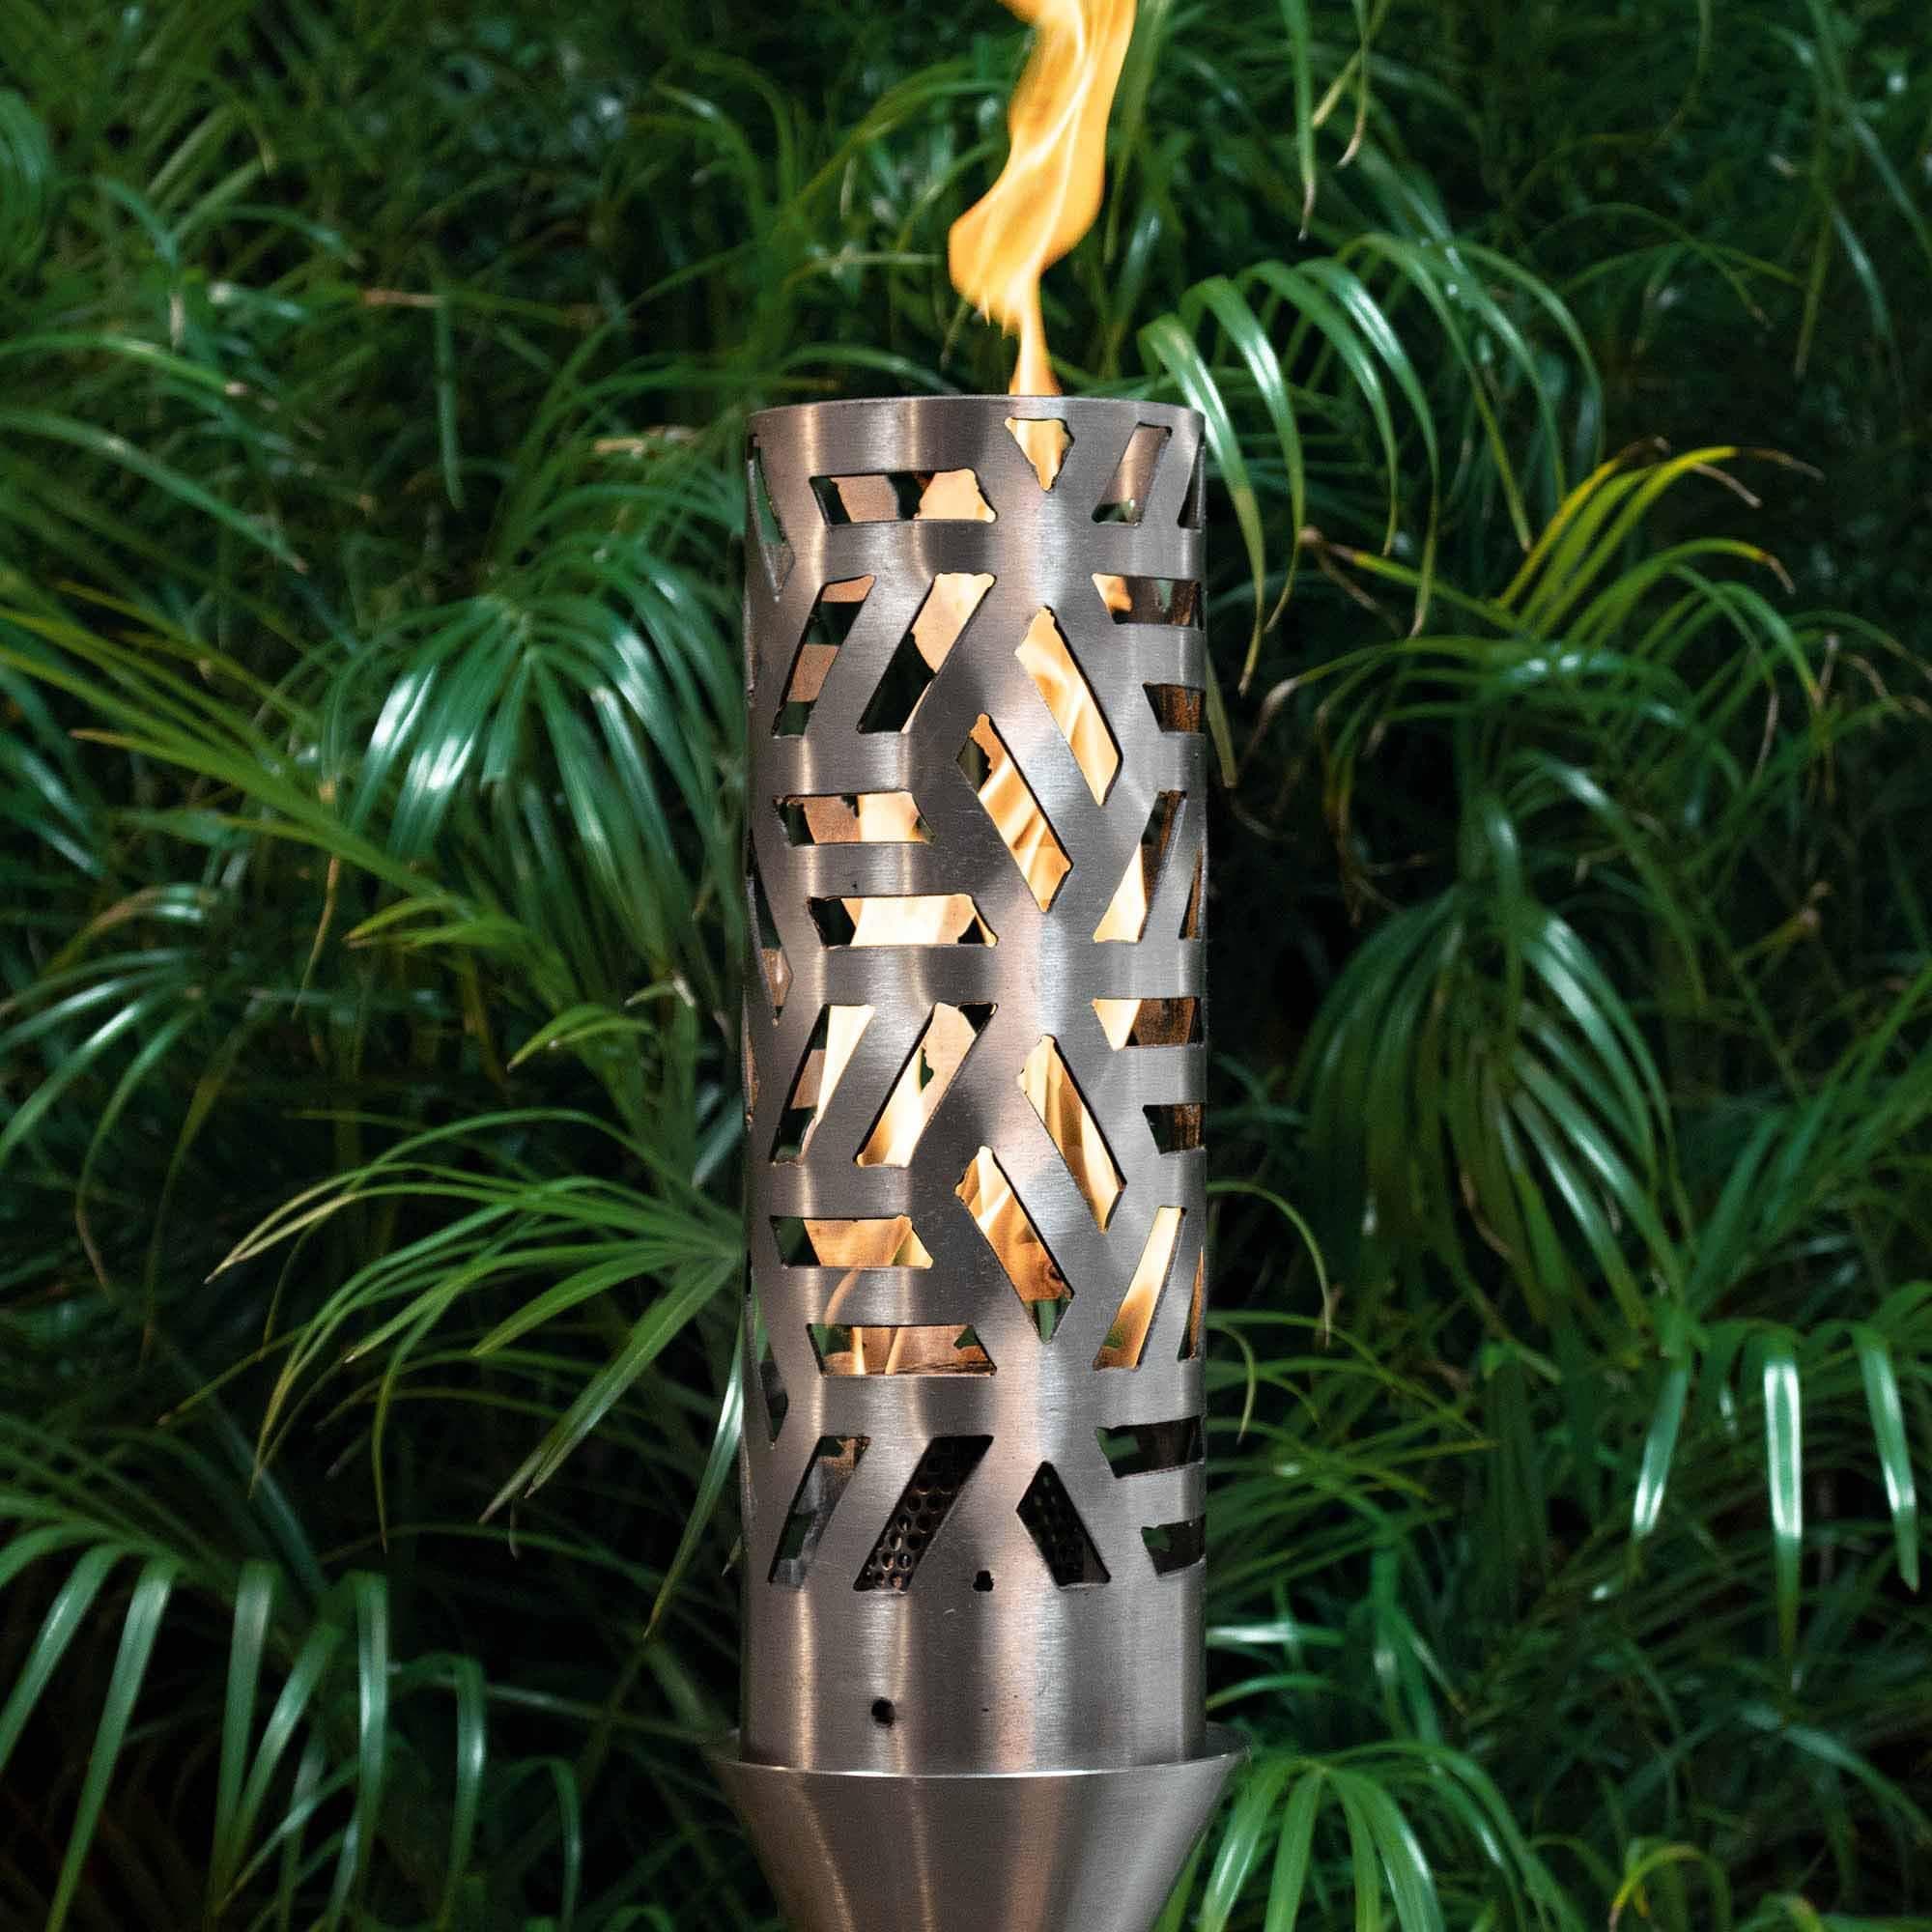 The Outdoor Plus Cubist Torch - Cubist Torch Kit